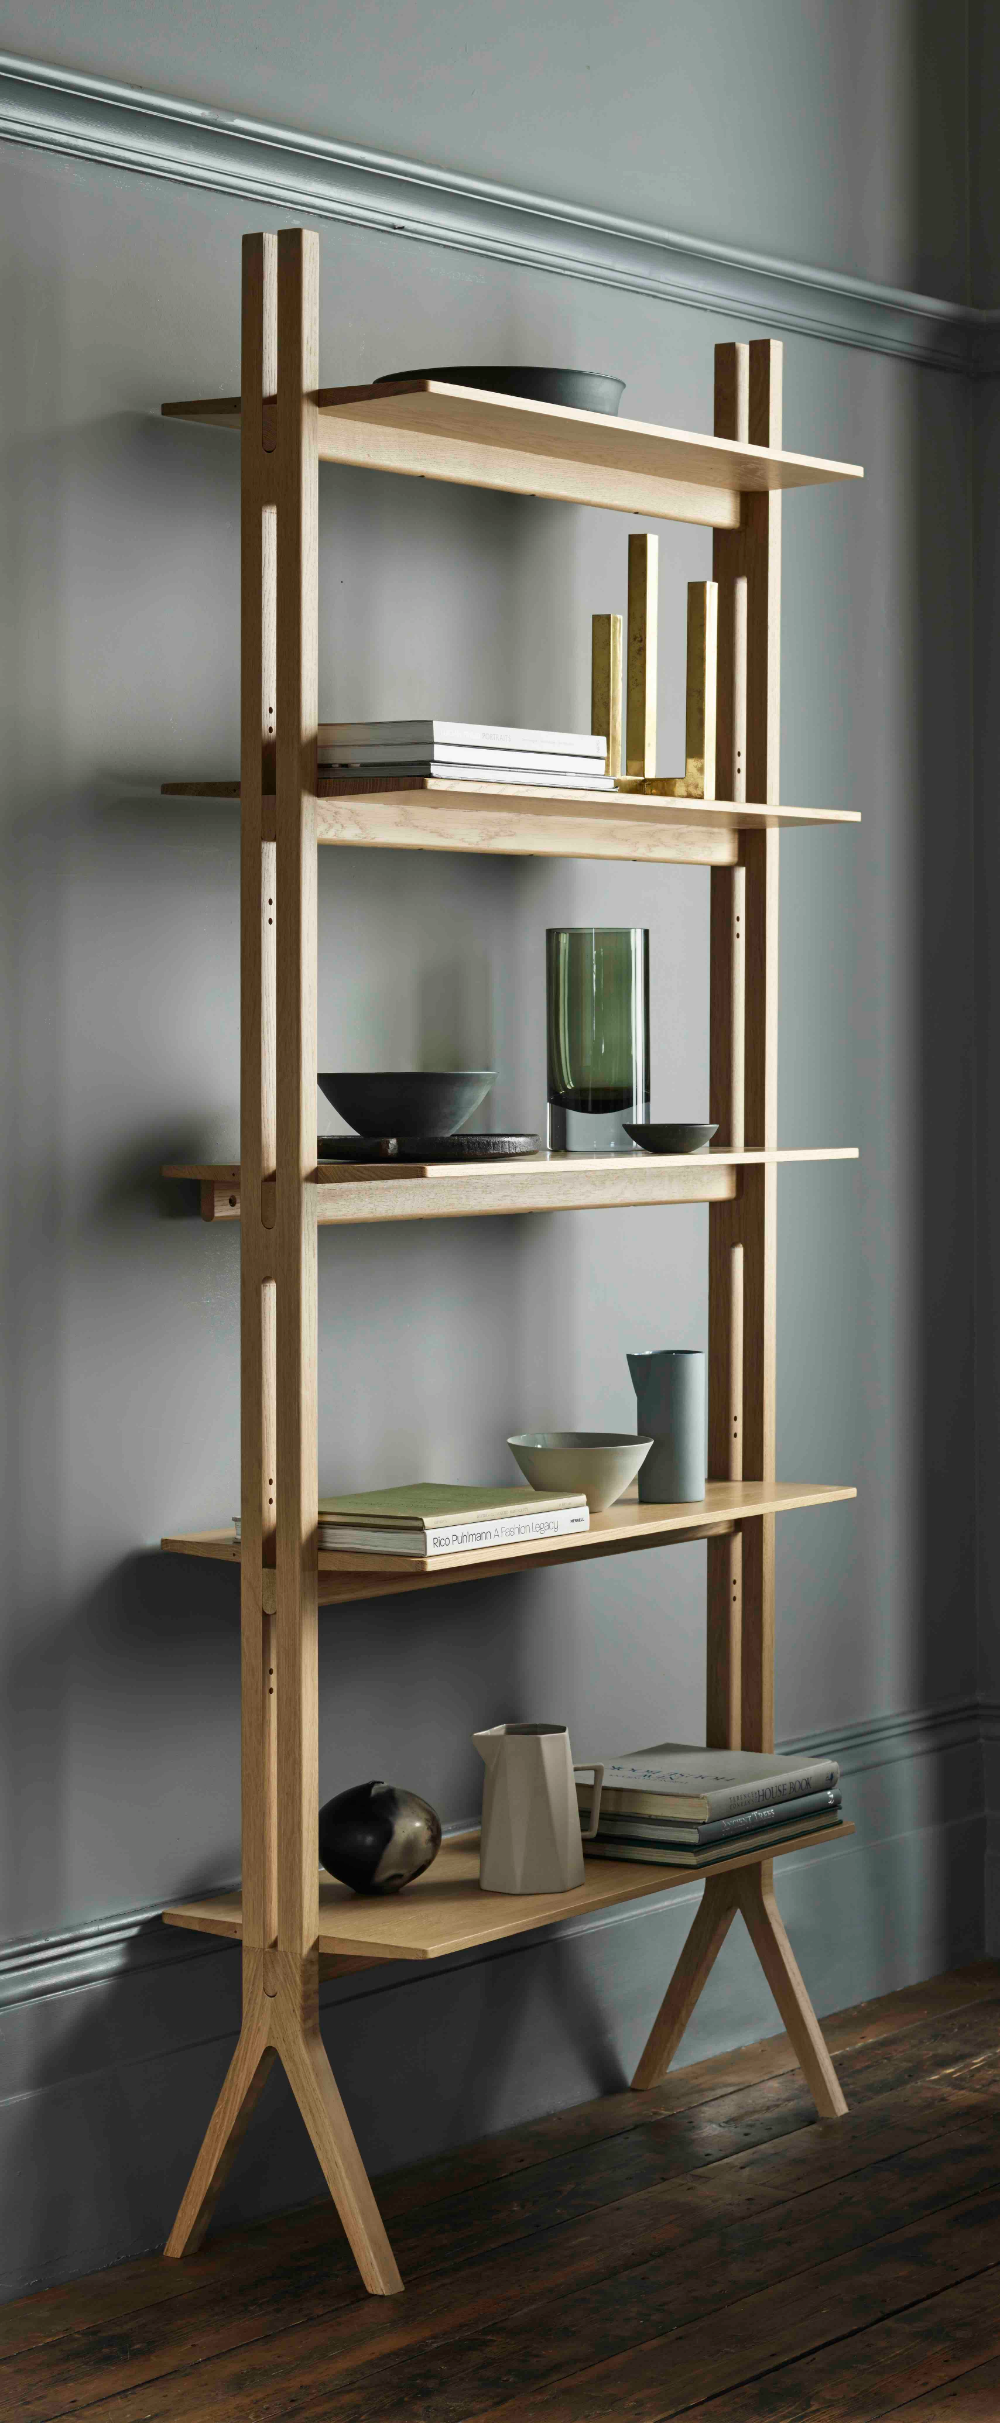 The Beauty of Wood Shelves: A Functional and Elegant Storage Solution